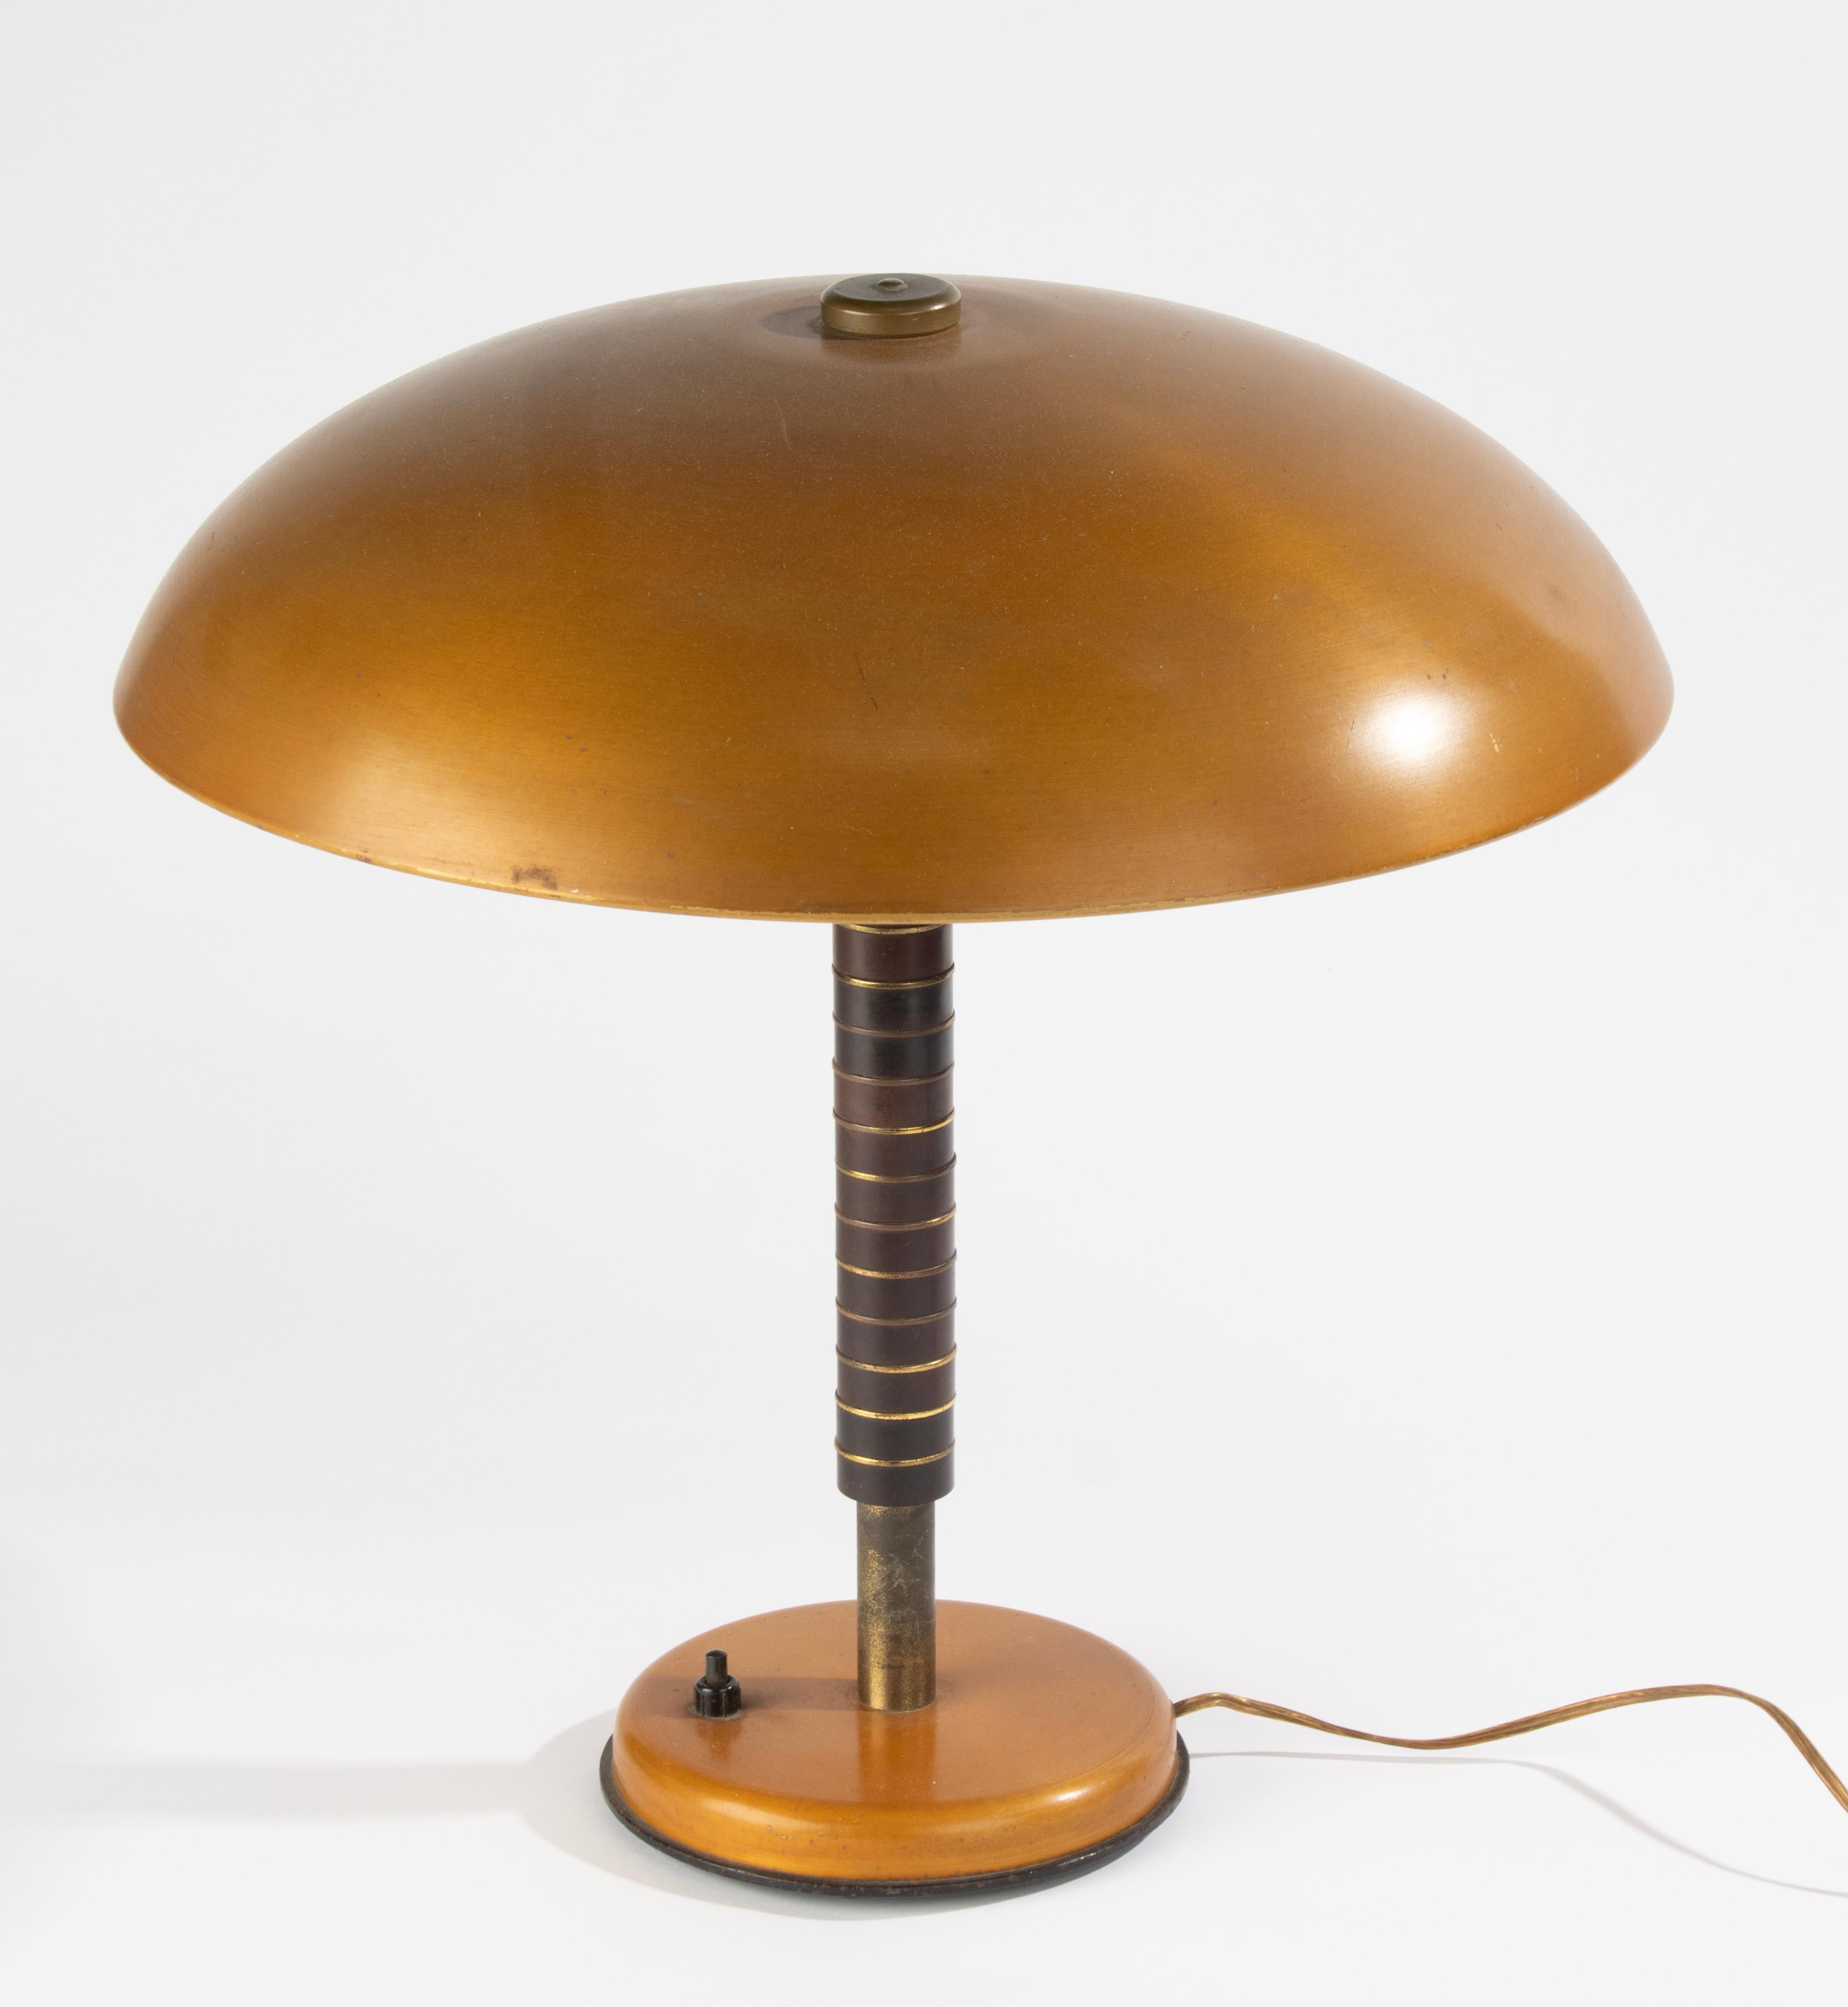 A beautiful vintage Bauhaus table lamp.
Possibly from the manufacturer SBF. The lamp has several marks / numbers, but no clear mark.
The lamp is made of metal with bakelite accents on the stem.
The lamp is in good condition with minor signs of age.